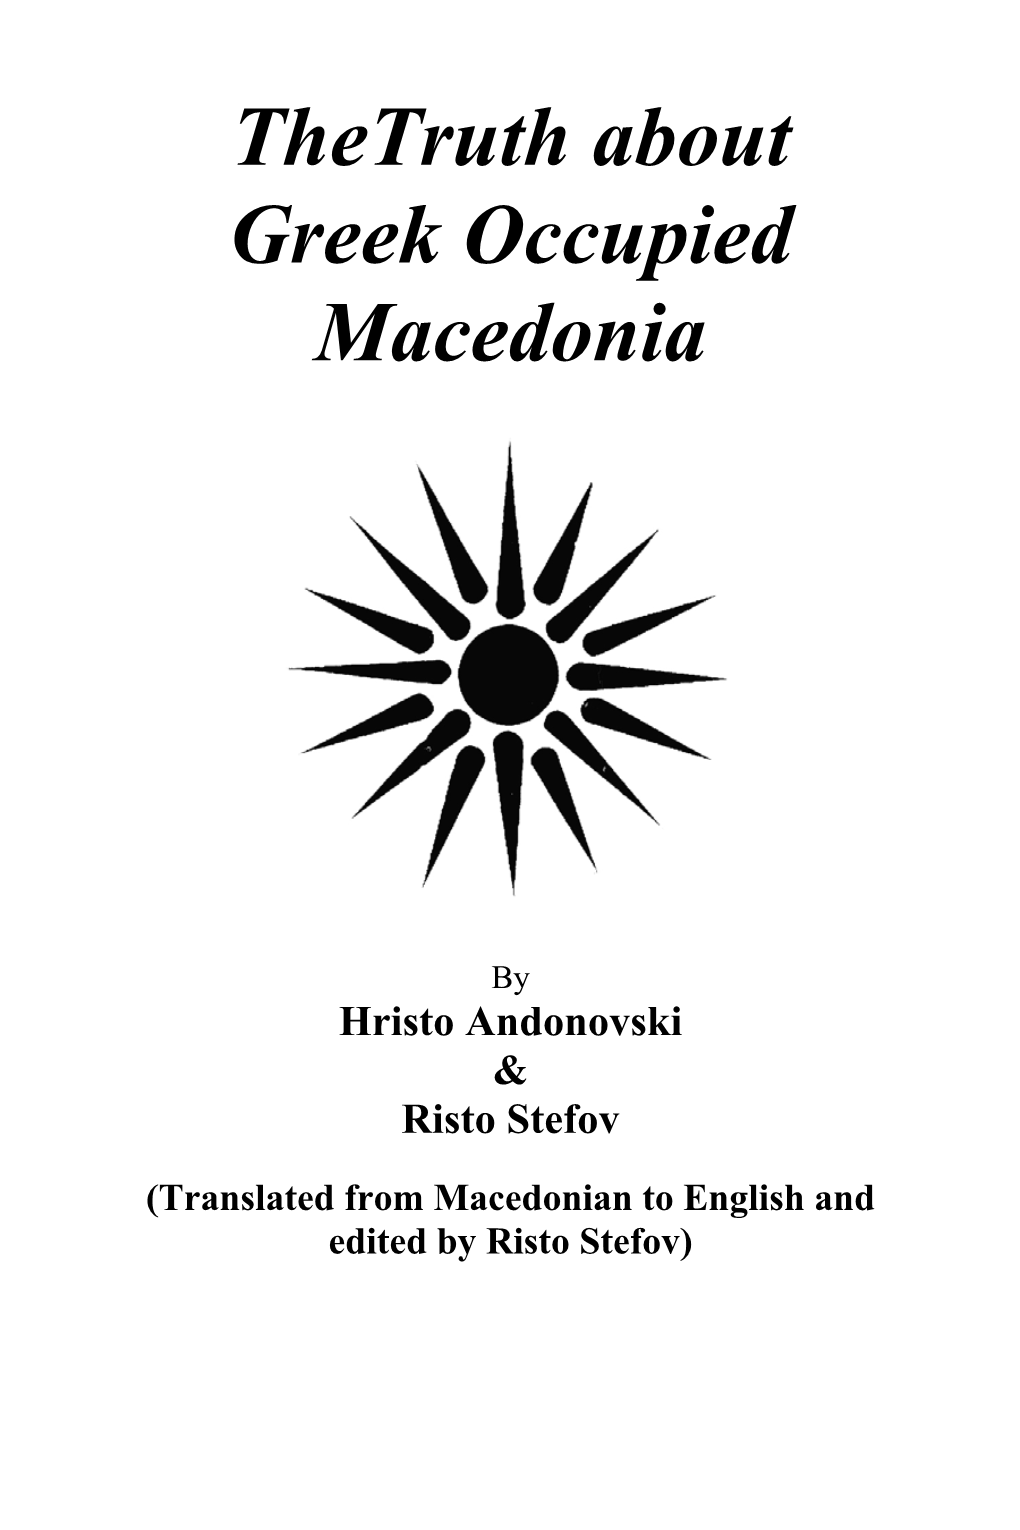 The Truth About Greek Occupied Macedonia